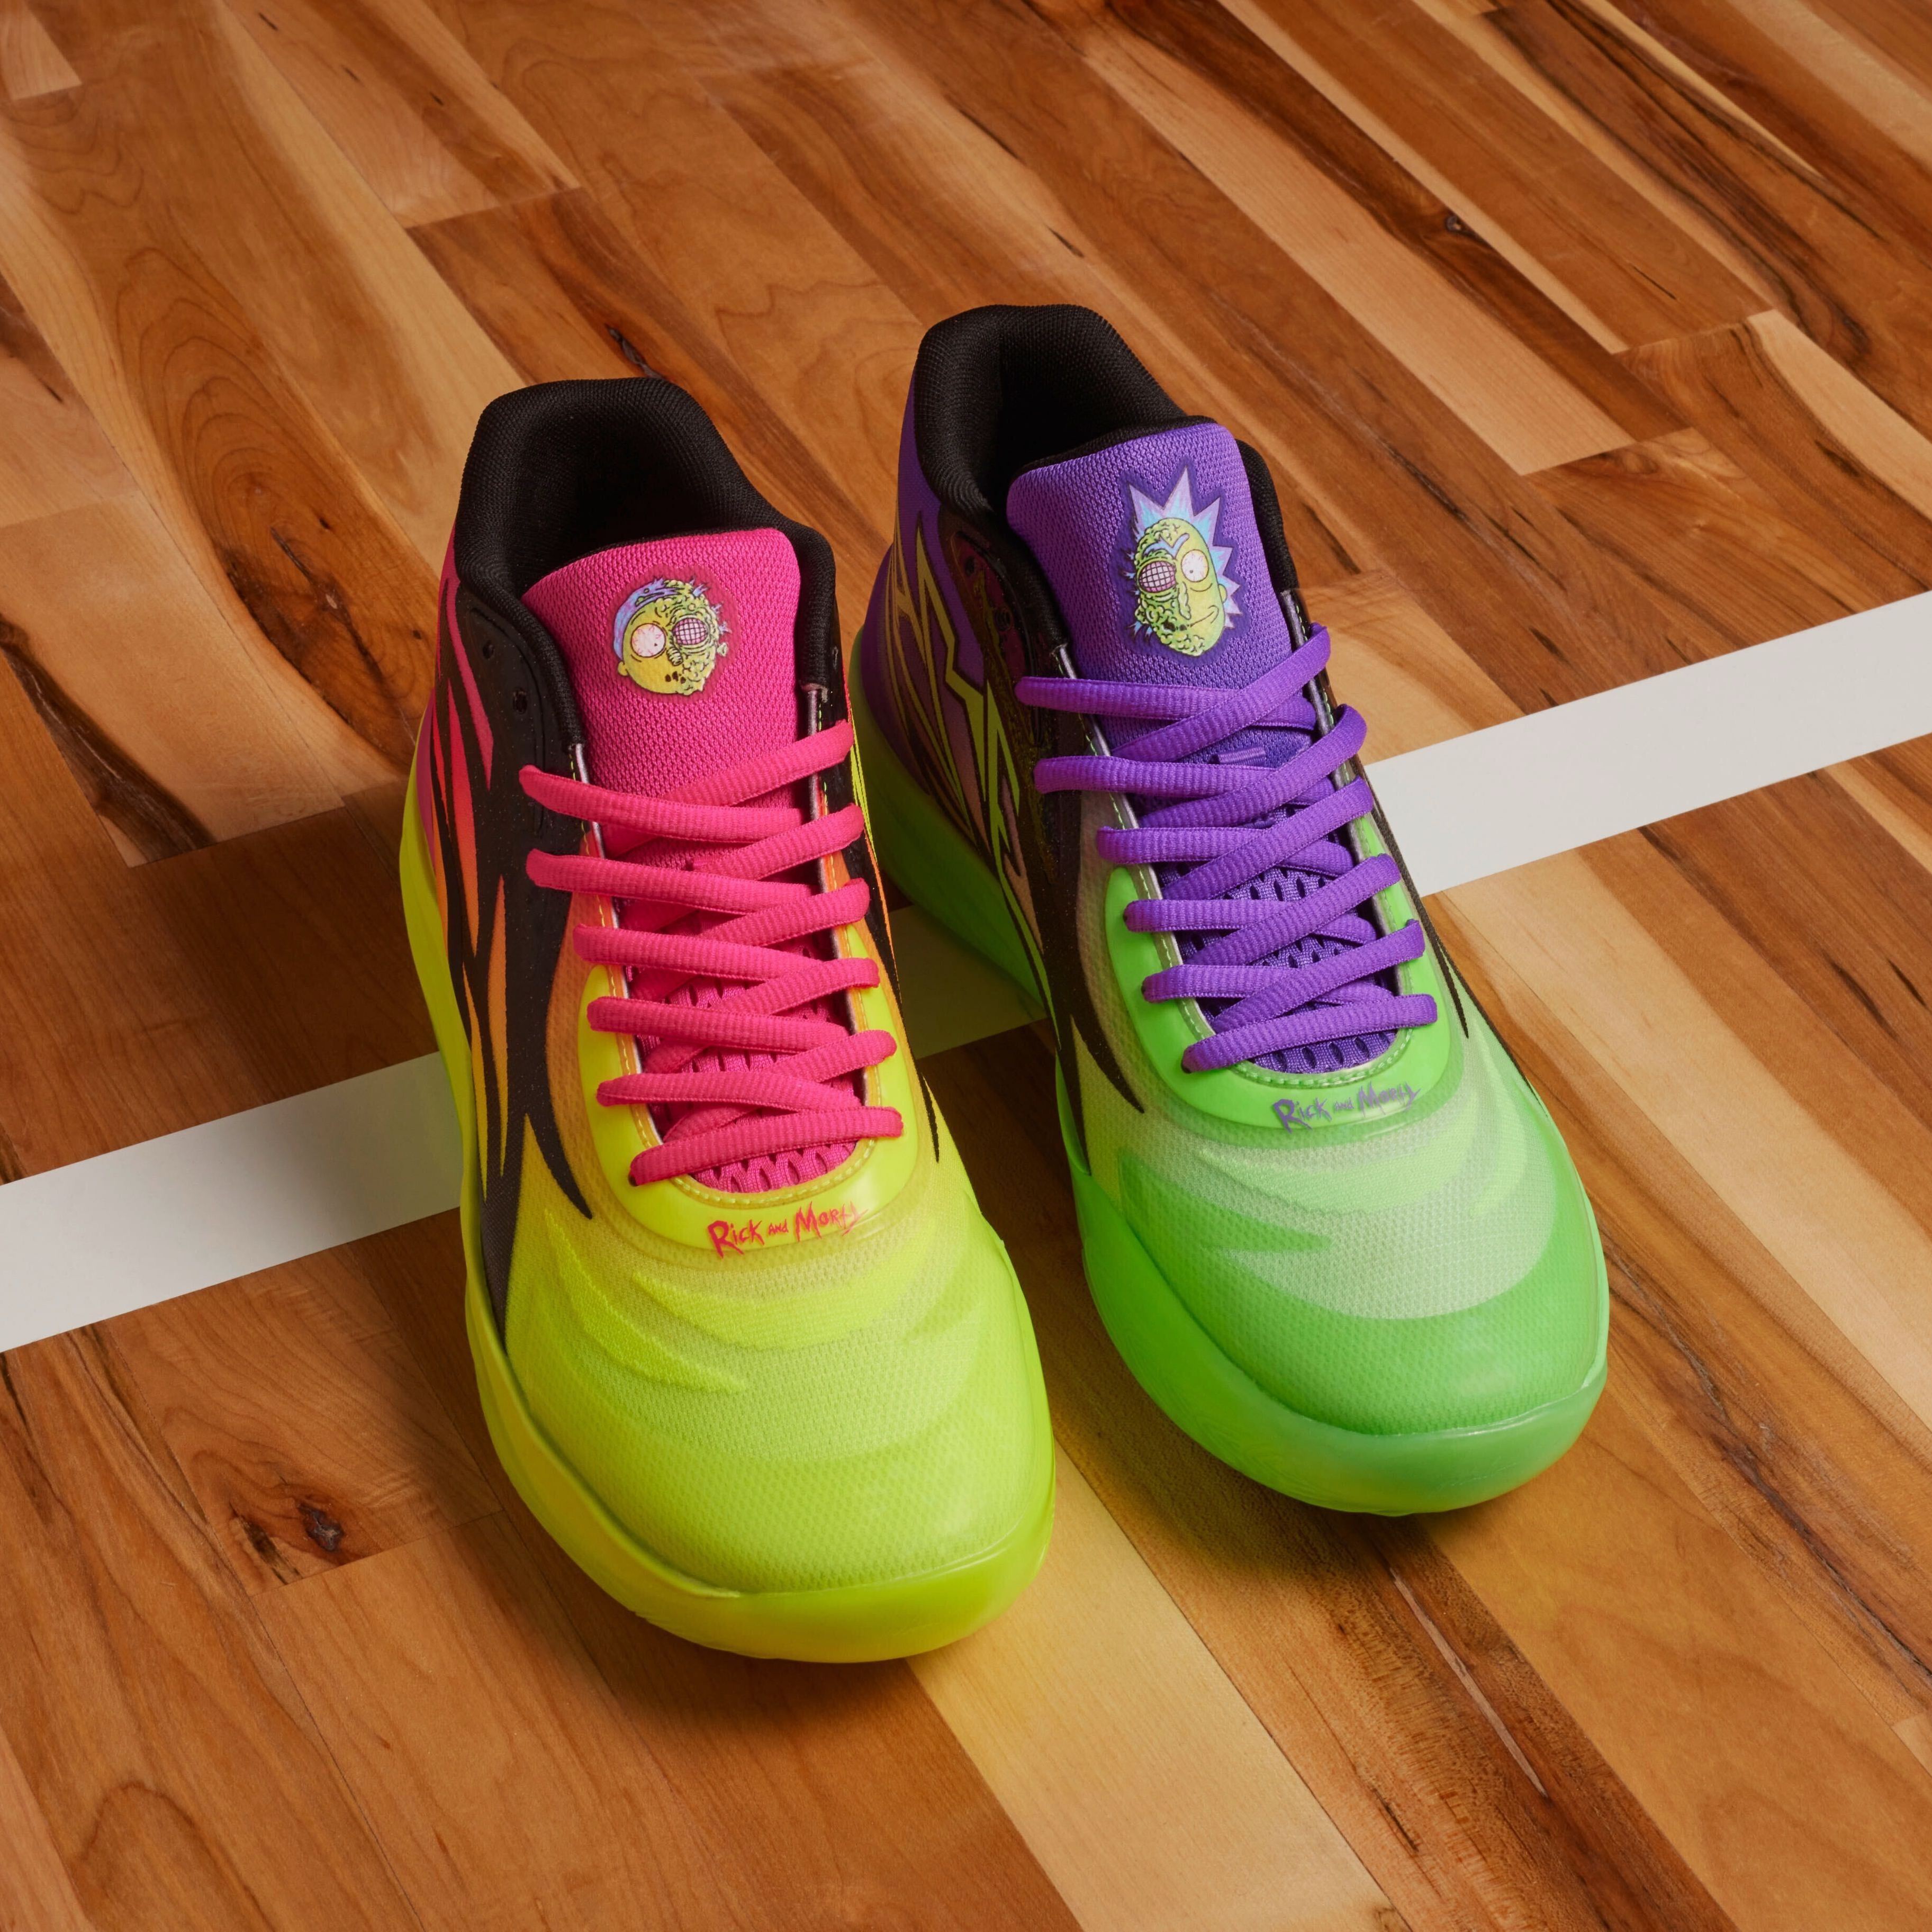 Puma Is Teaming Up with Rick and Morty for Another LaMelo Ball